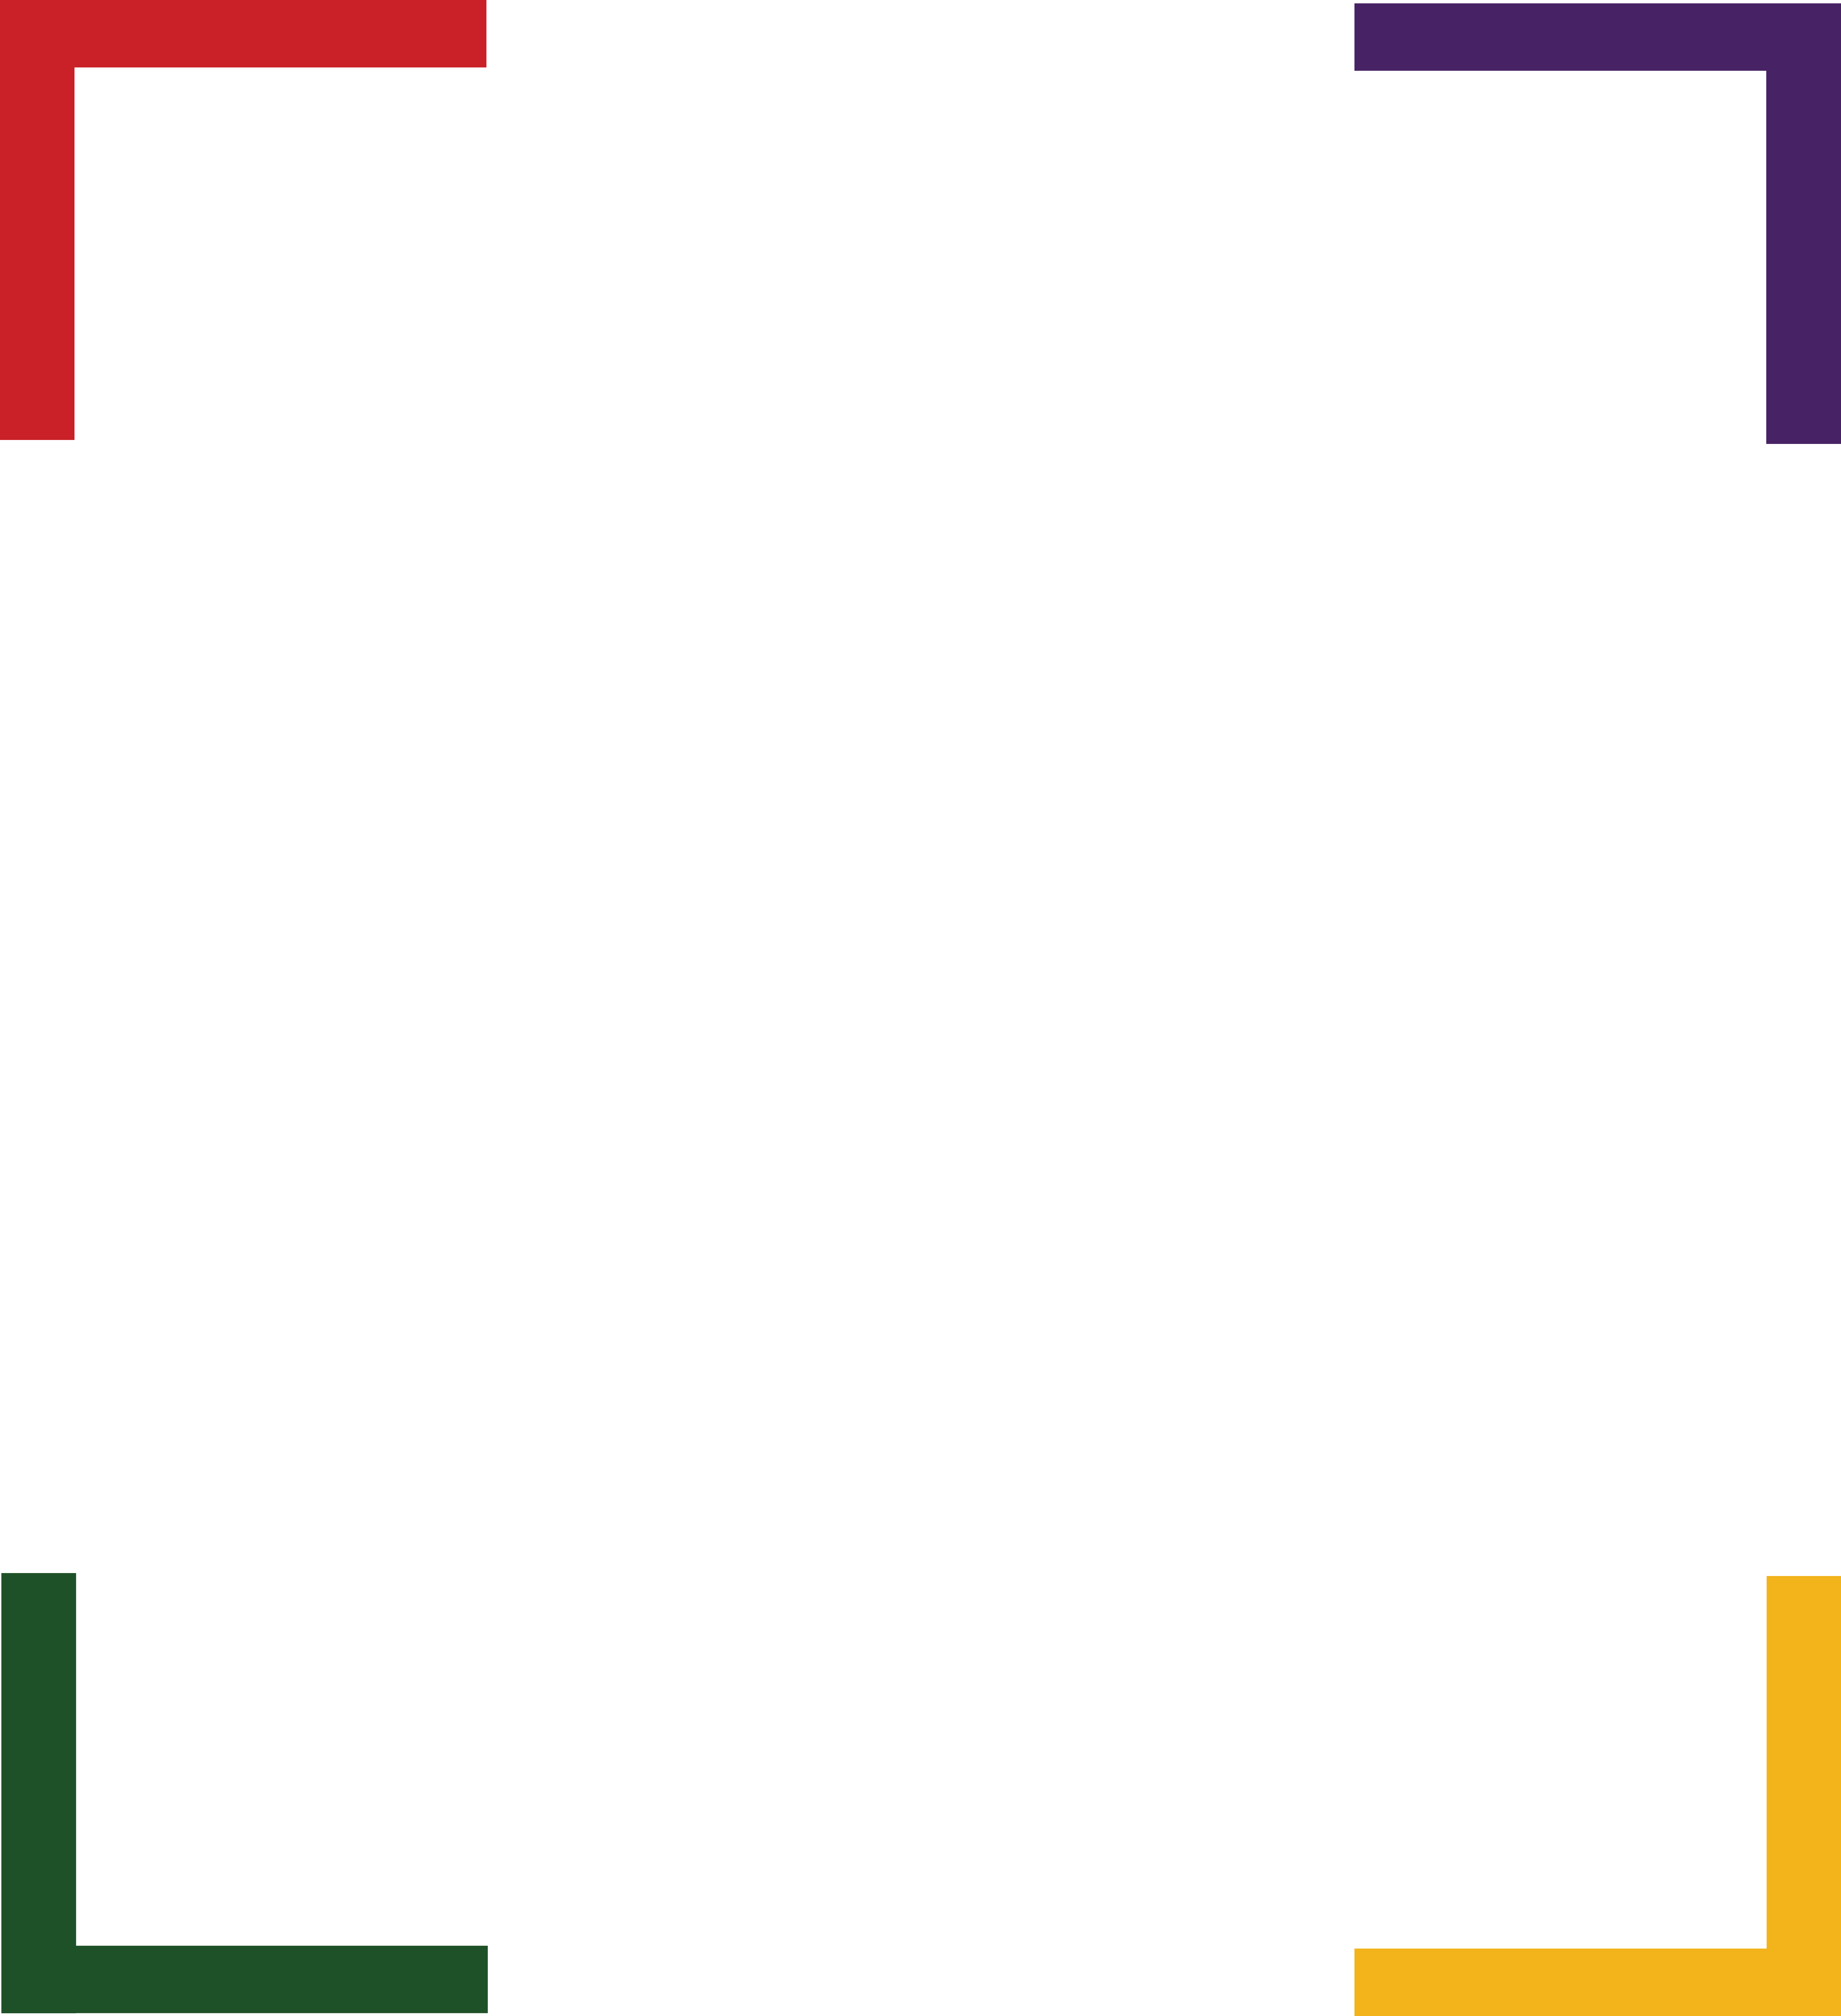 Black Male Voter Project Education Fund